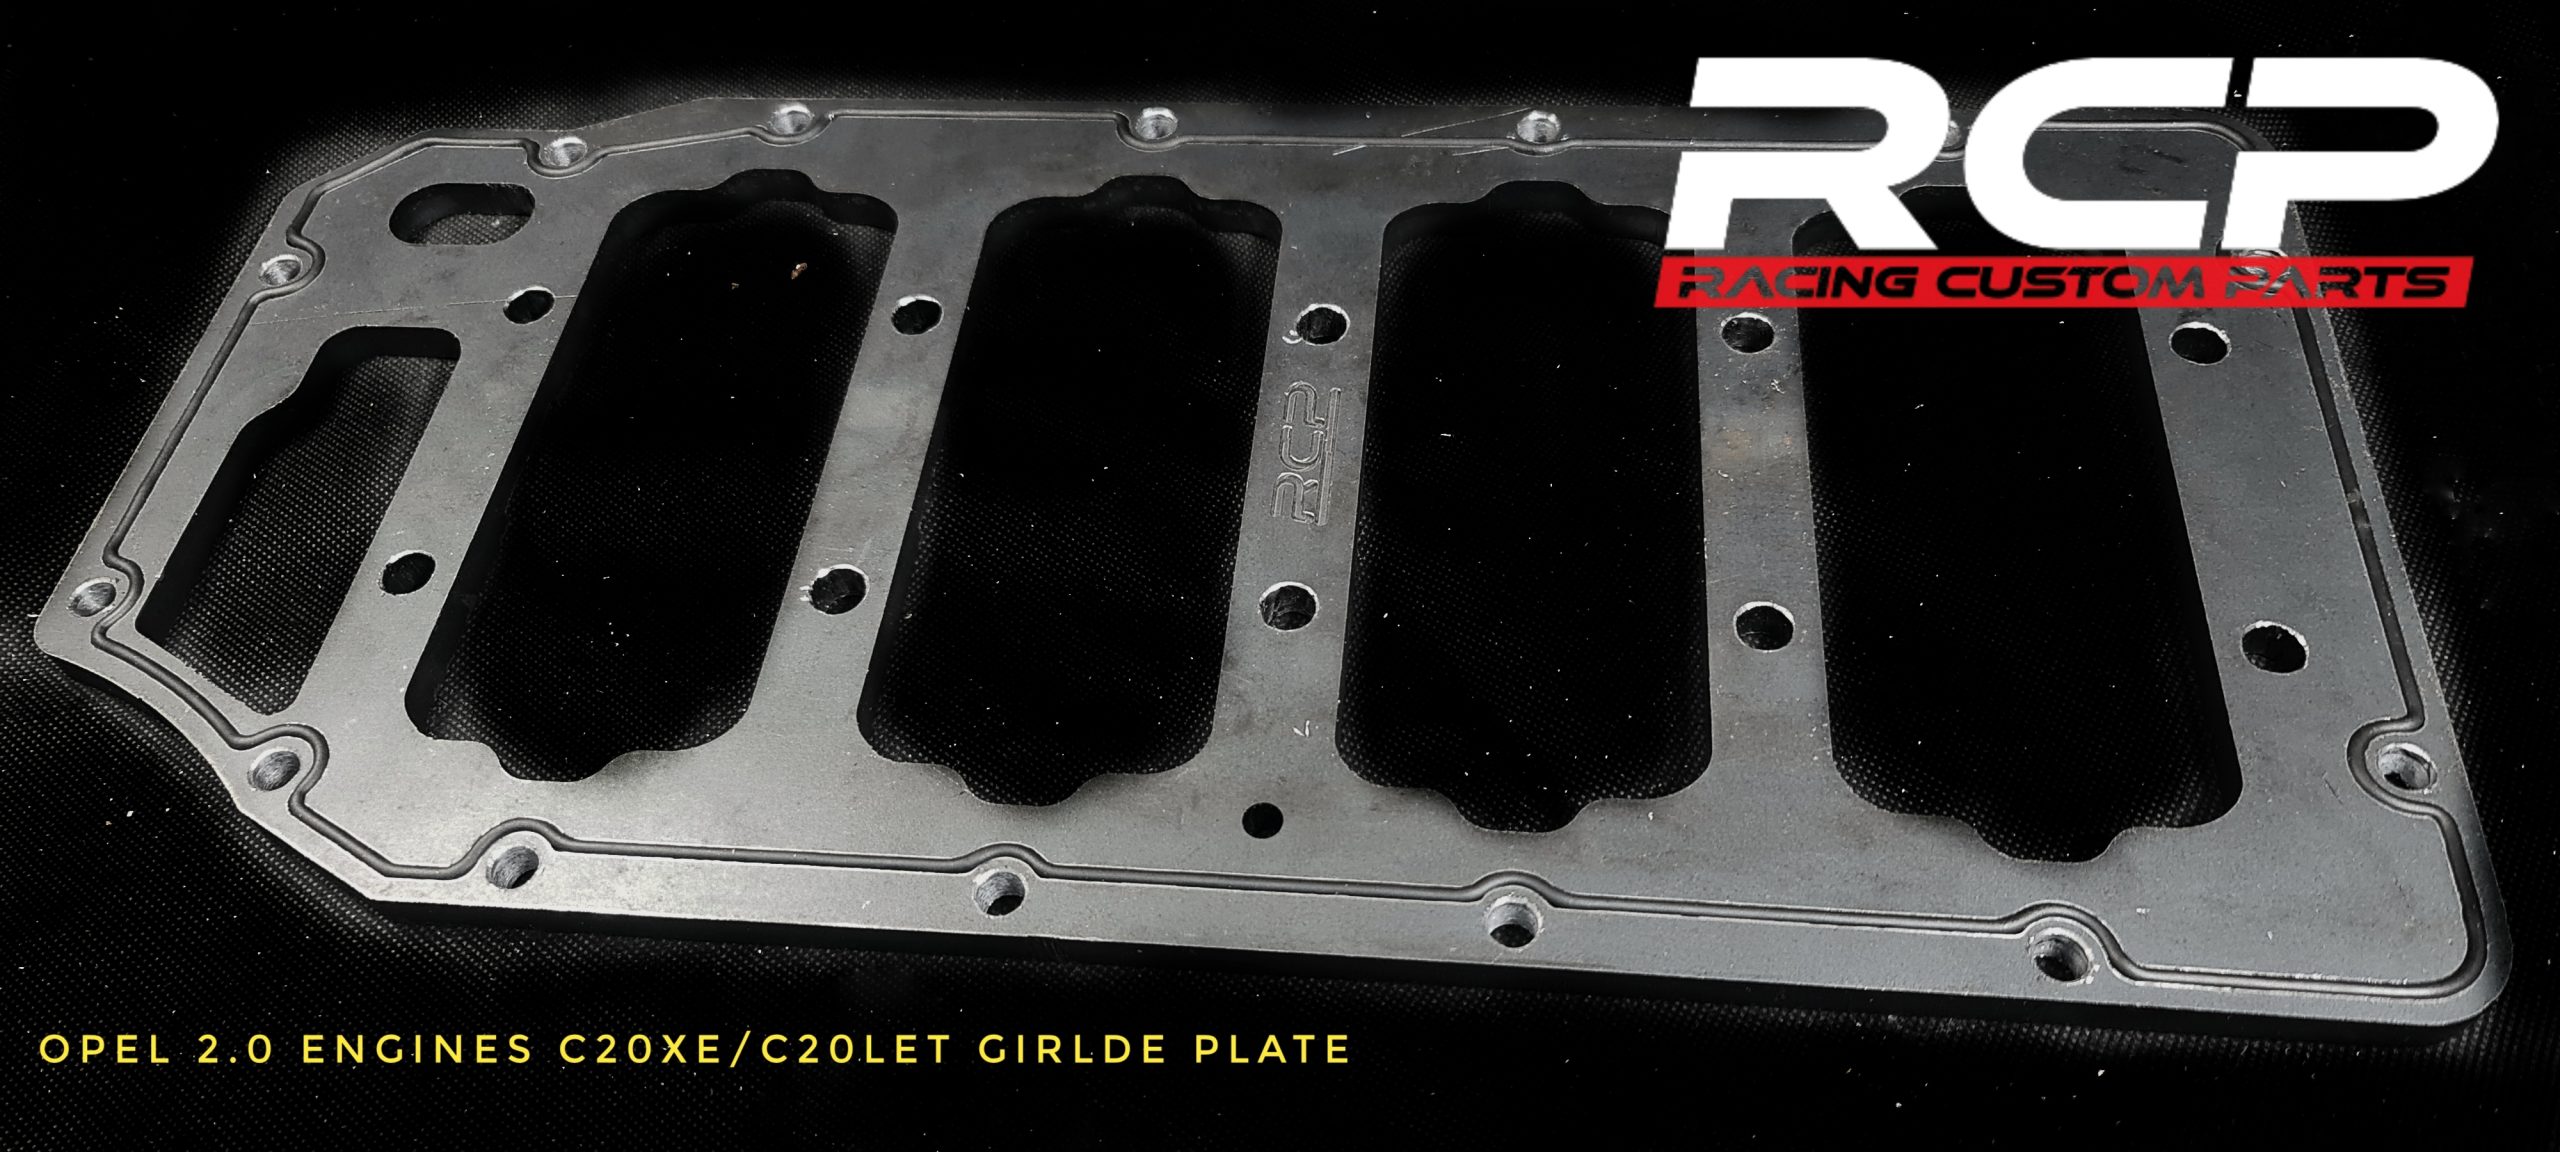 c20xe c20let z20let girdle plate oilpan opel vauxhall holden calibra vectra astra kadet turbo racing custom parts rcp griddle plate block girdle